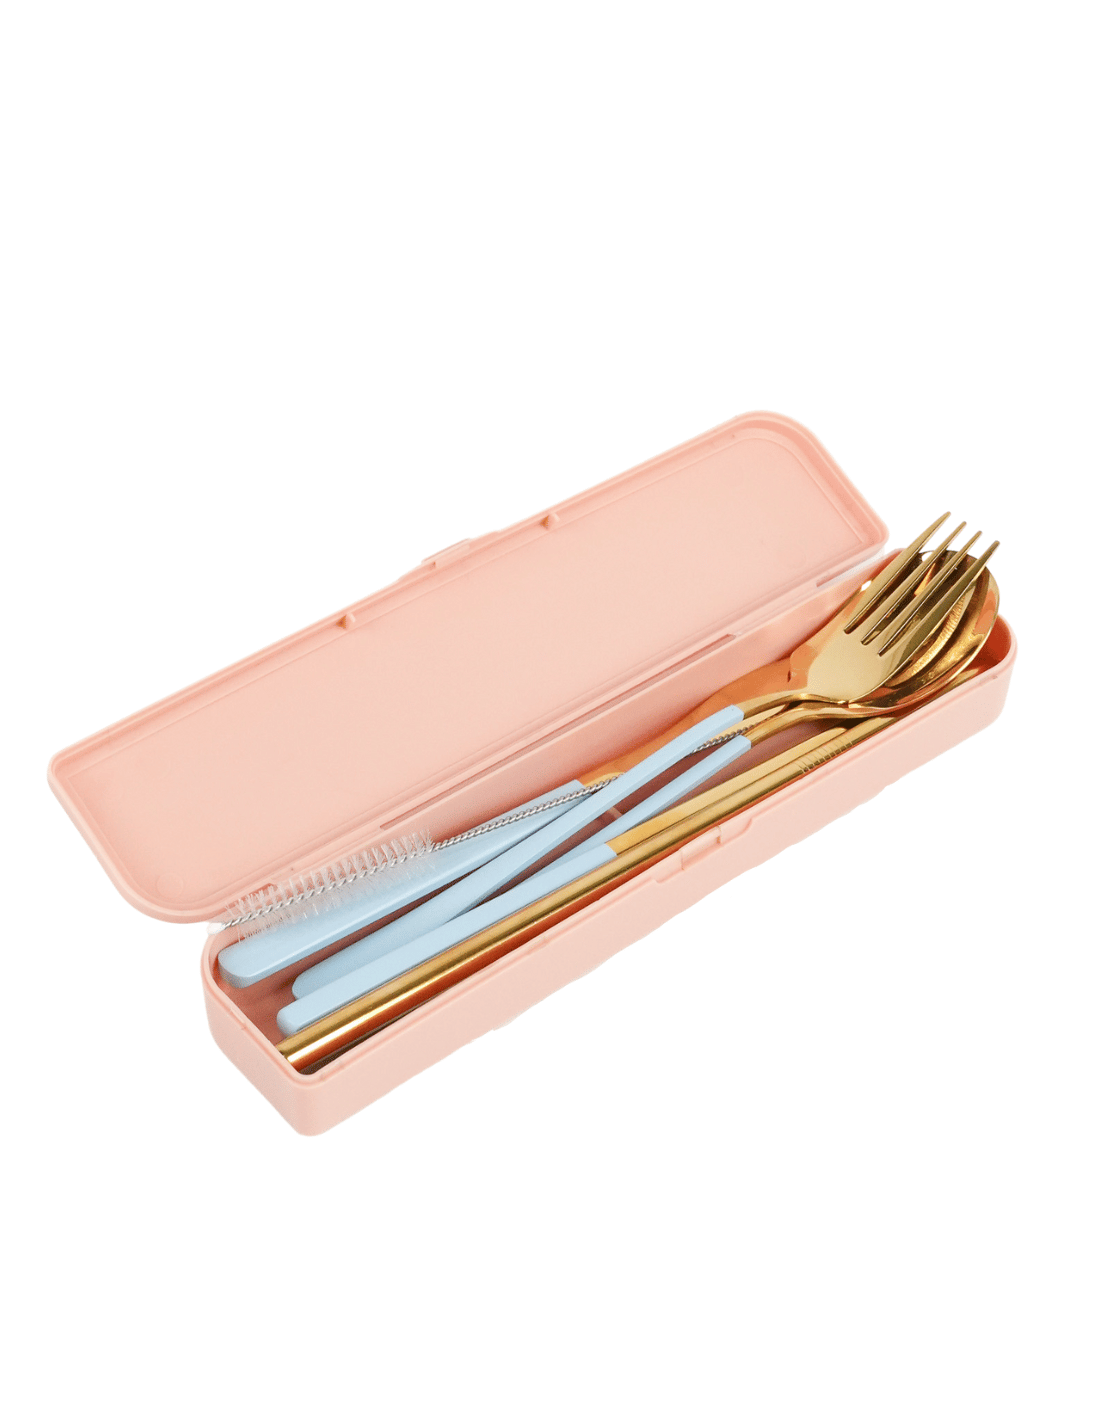 Cutlery Kit - Gold with Powder Blue Handle